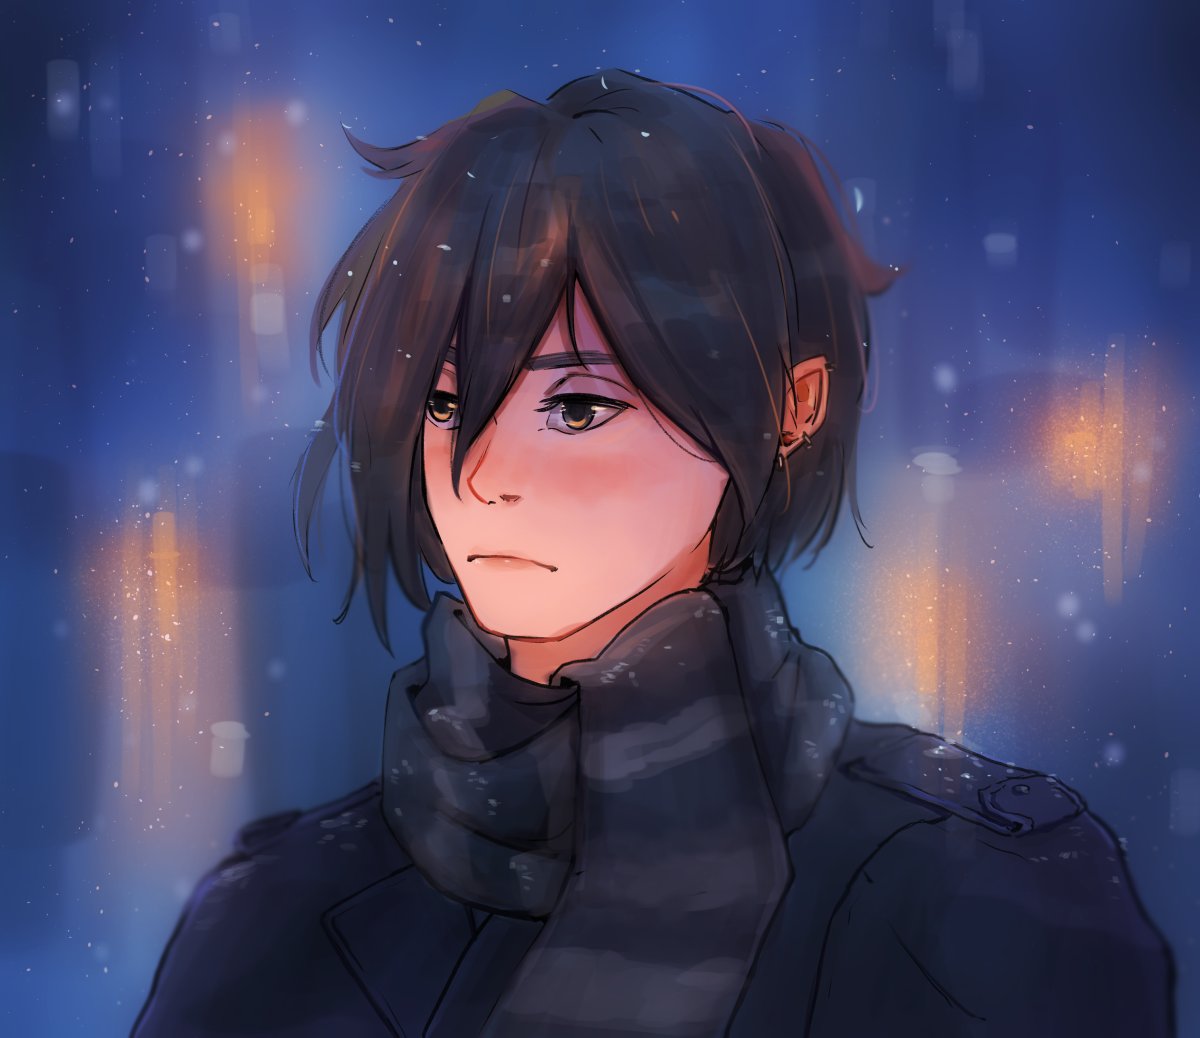 My husbando flustered at the Night Market 😚❄️ #StardewValley